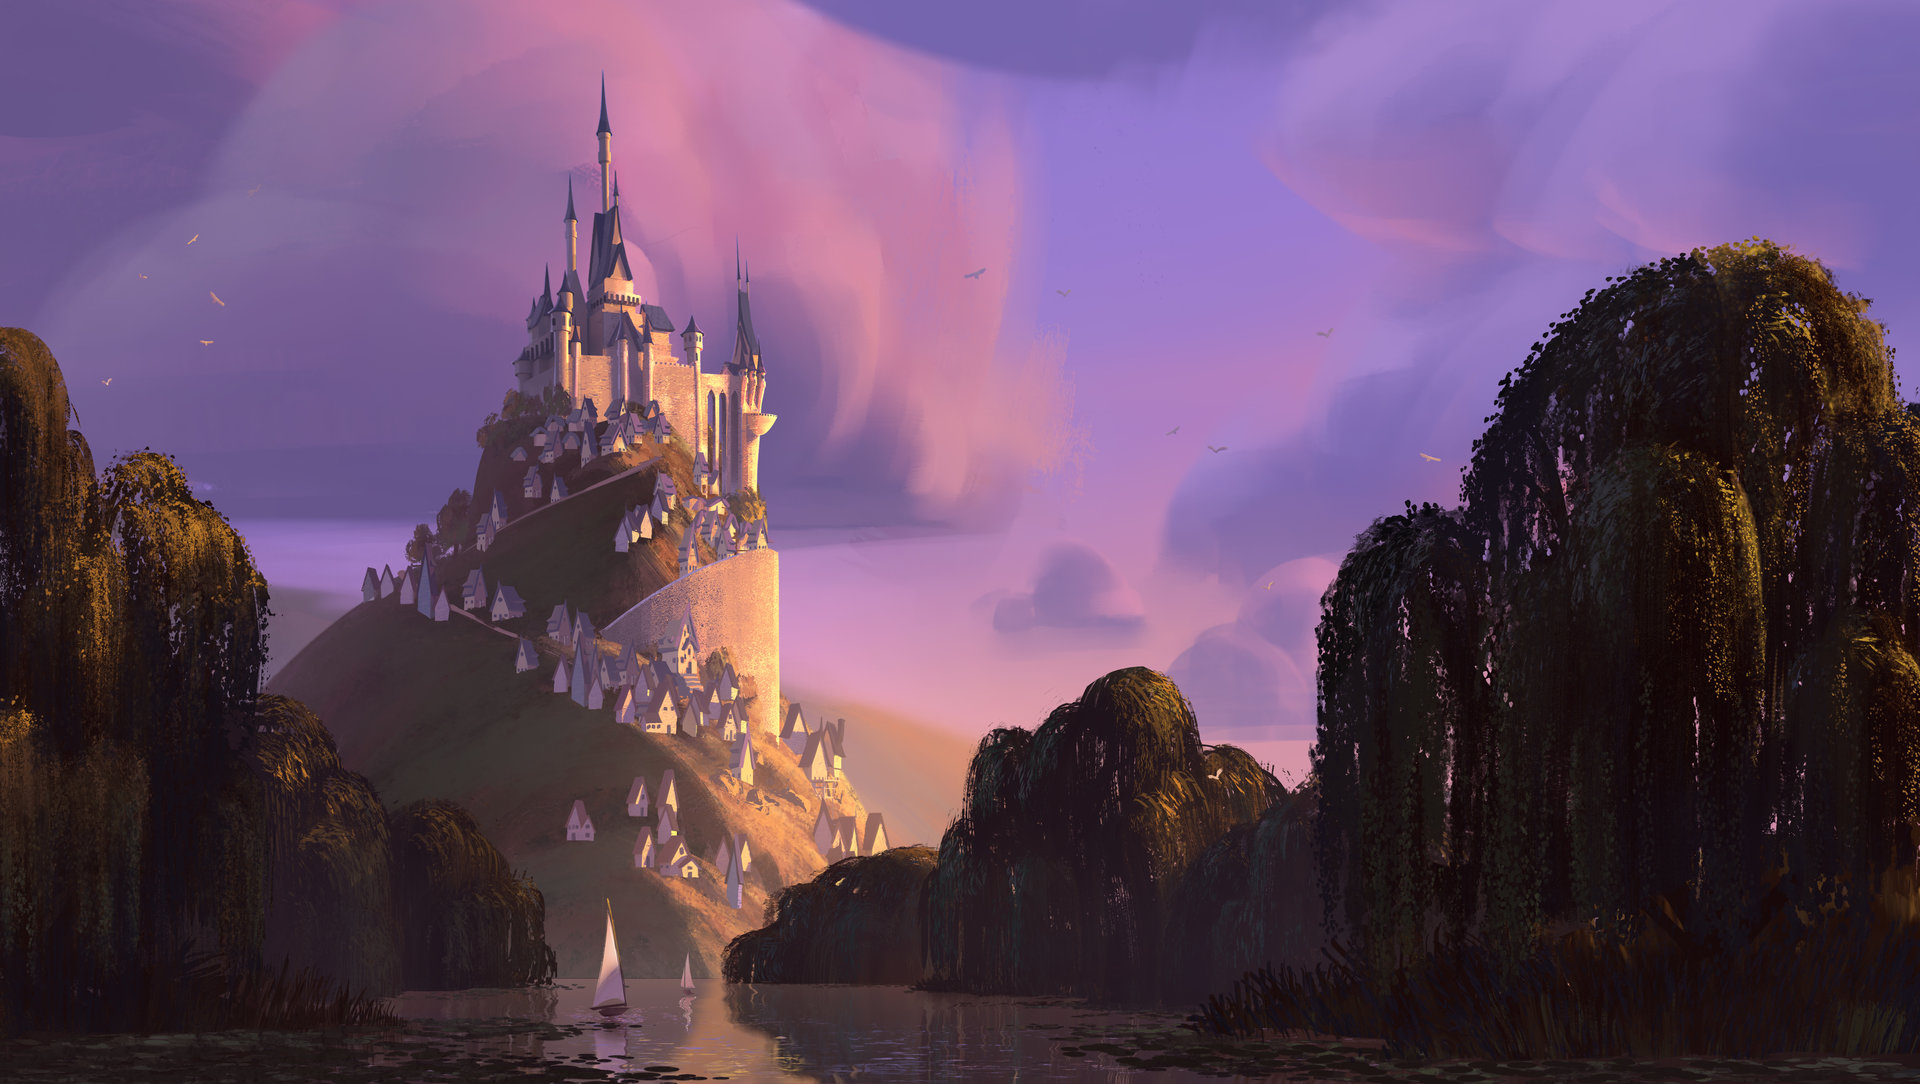 Castle on a Hill by Cathleen McAllister